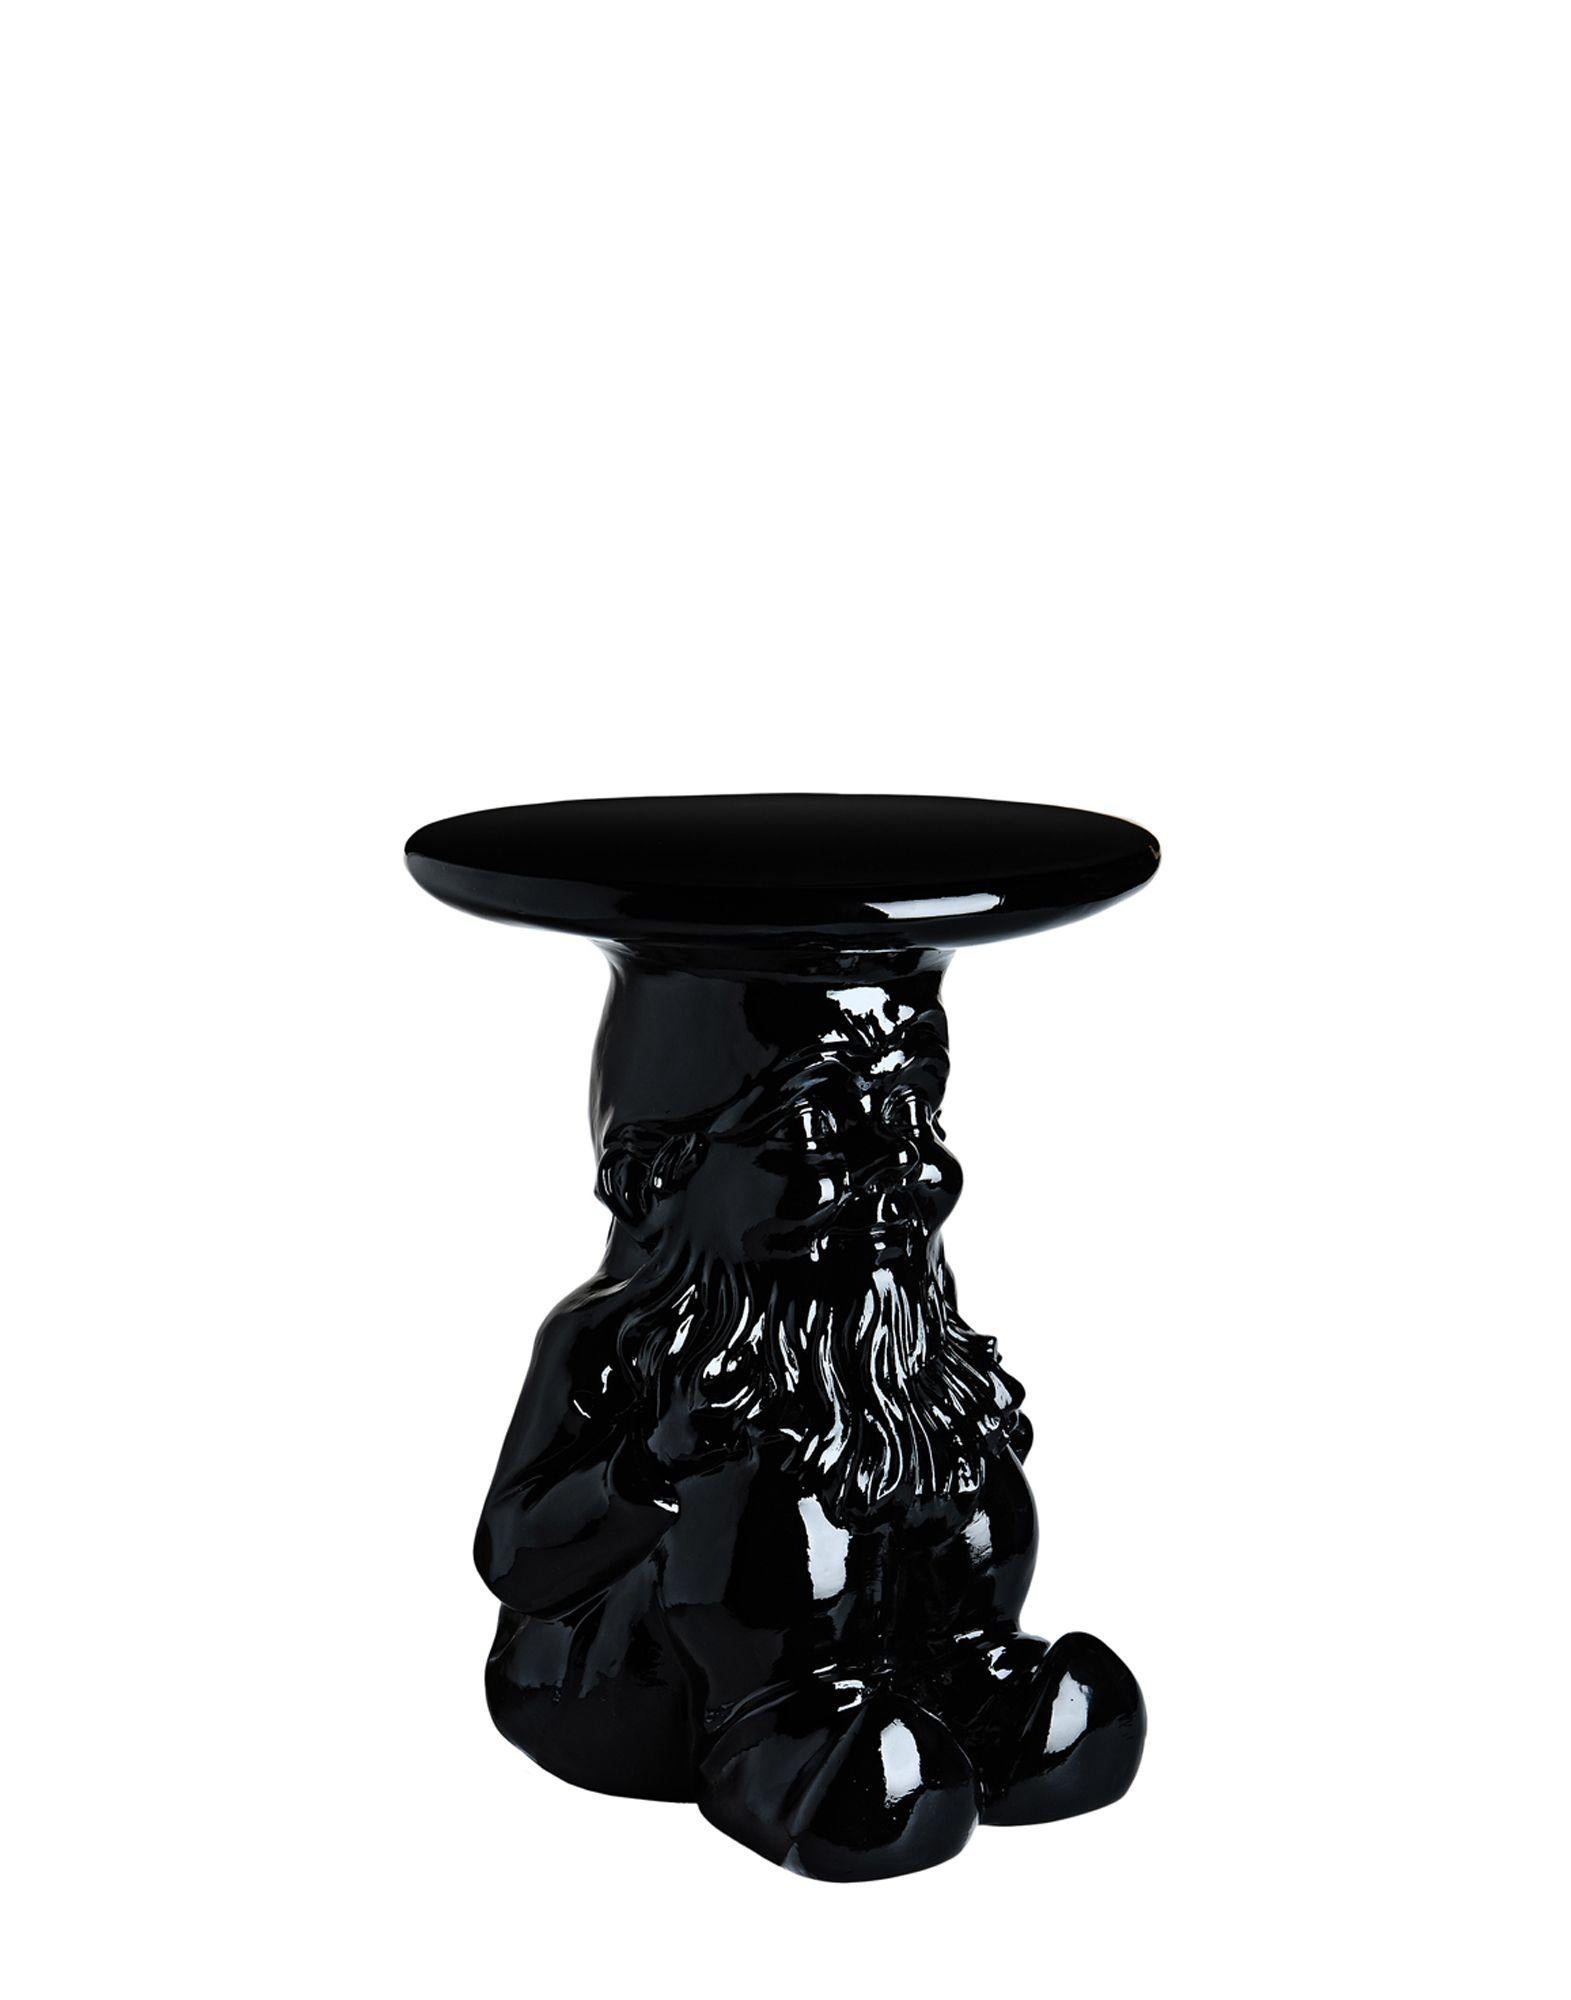 Napoleon table-stool, is charismatic personalities of striking originality and anti-conformism. Stools and tables which are cute and humorous but with one eye on functionality, thought up to furnish every setting imaginable. The gnome hats, in fact,